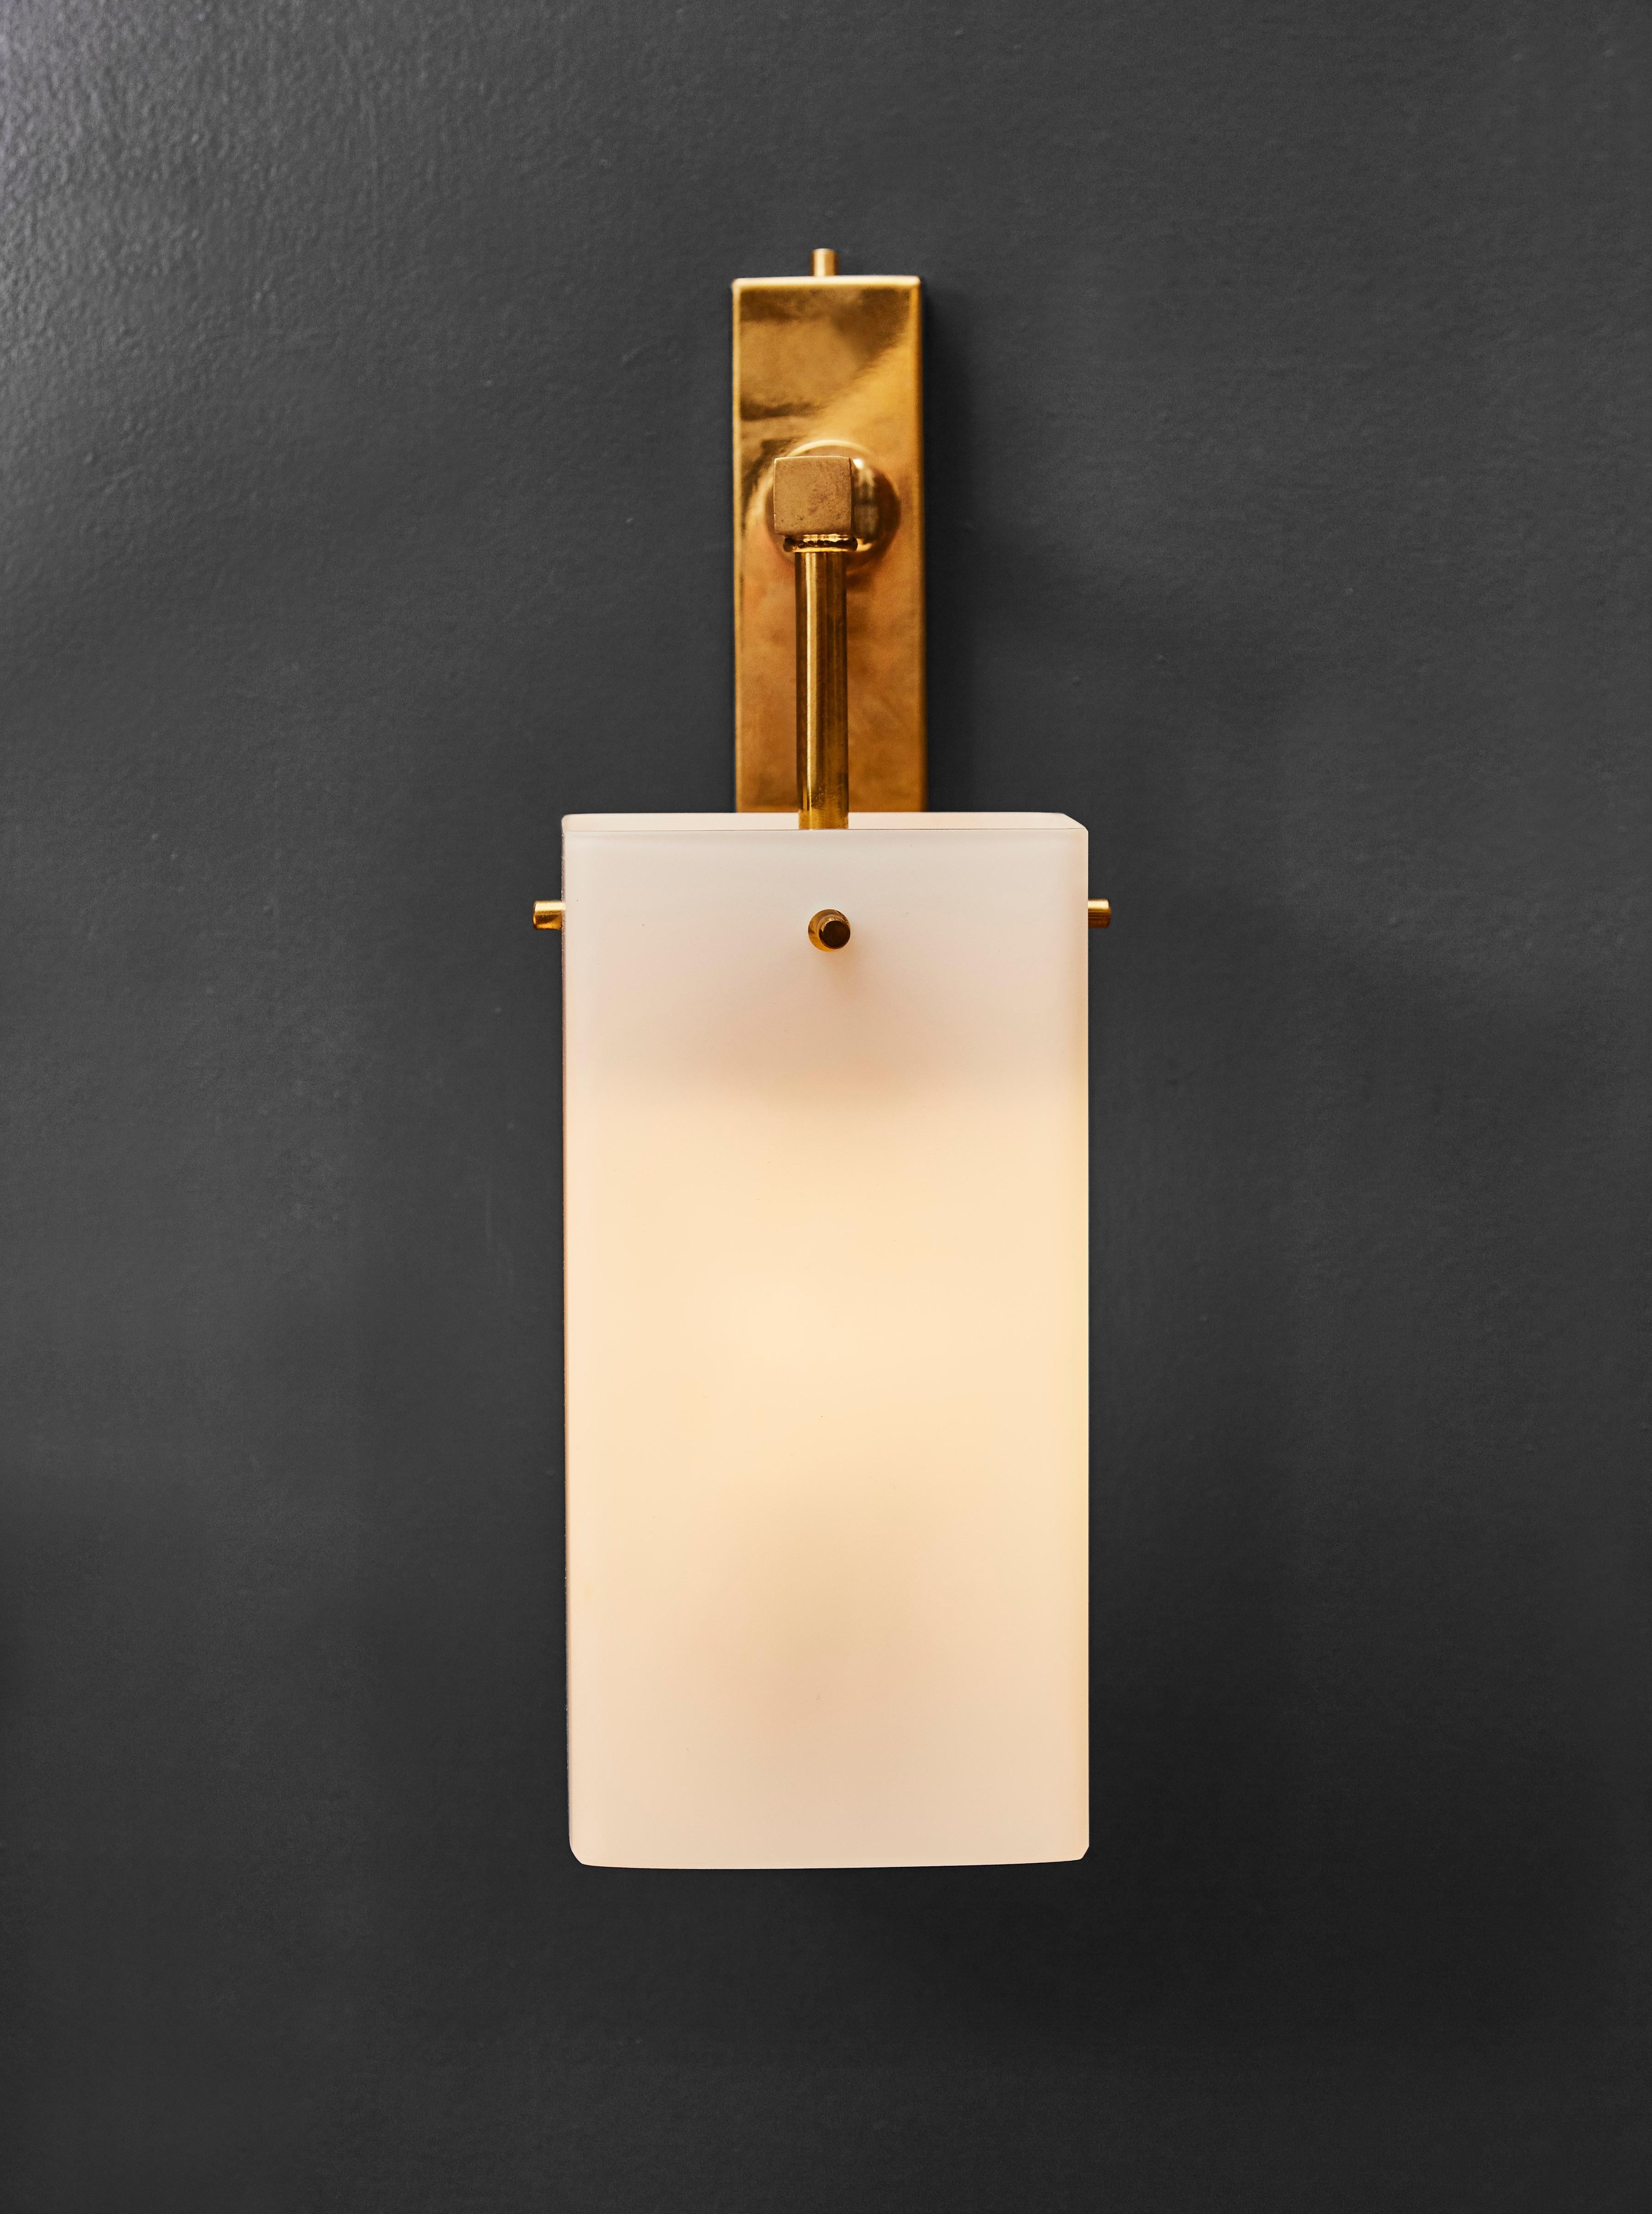 Set of four chic wall sconces made of brass supporting rectangular white glass shades.